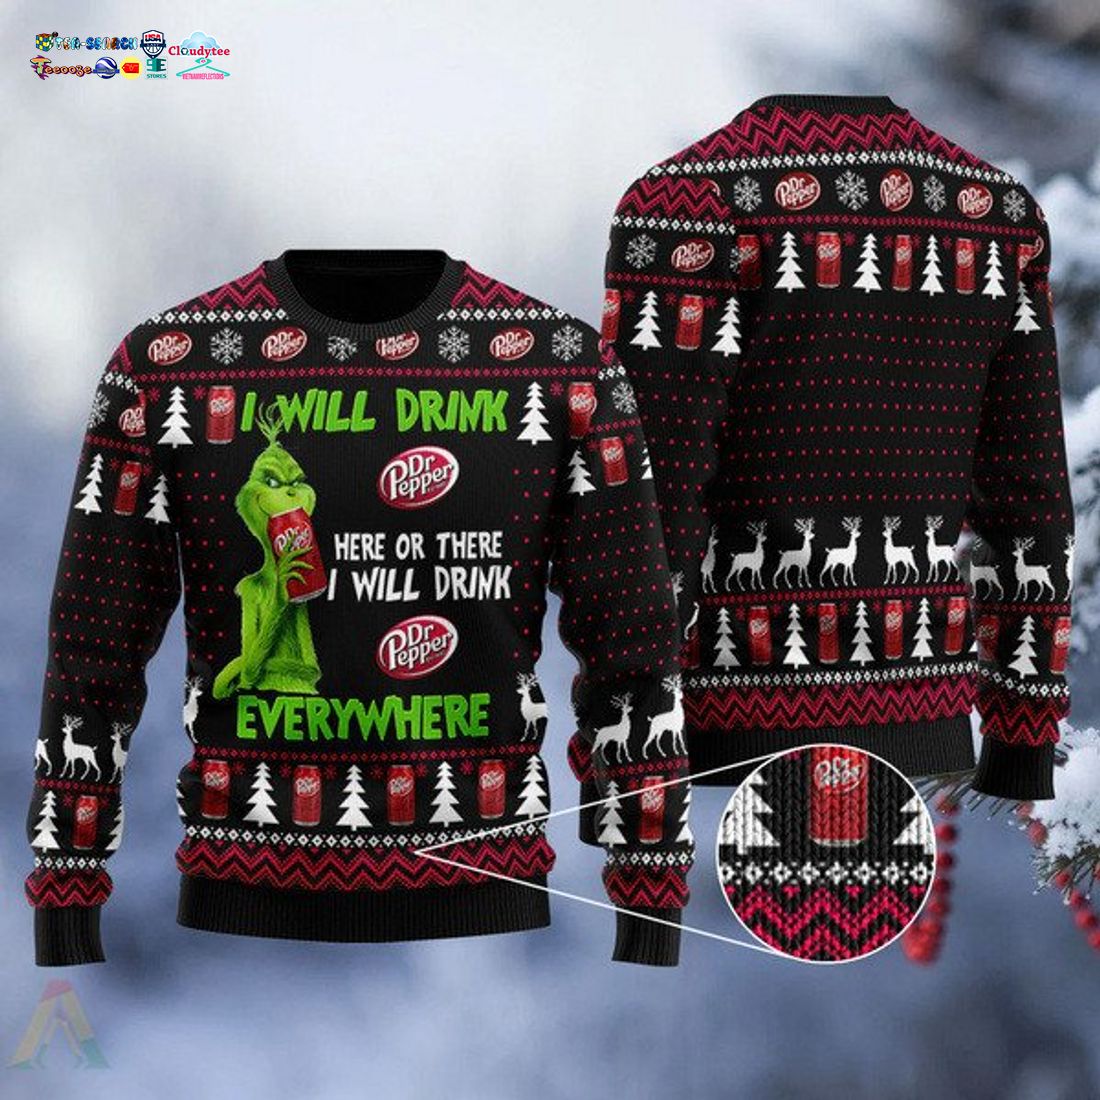 grinch-i-will-drink-dr-pepper-everywhere-ugly-christmas-sweater-1-DuIbz.jpg